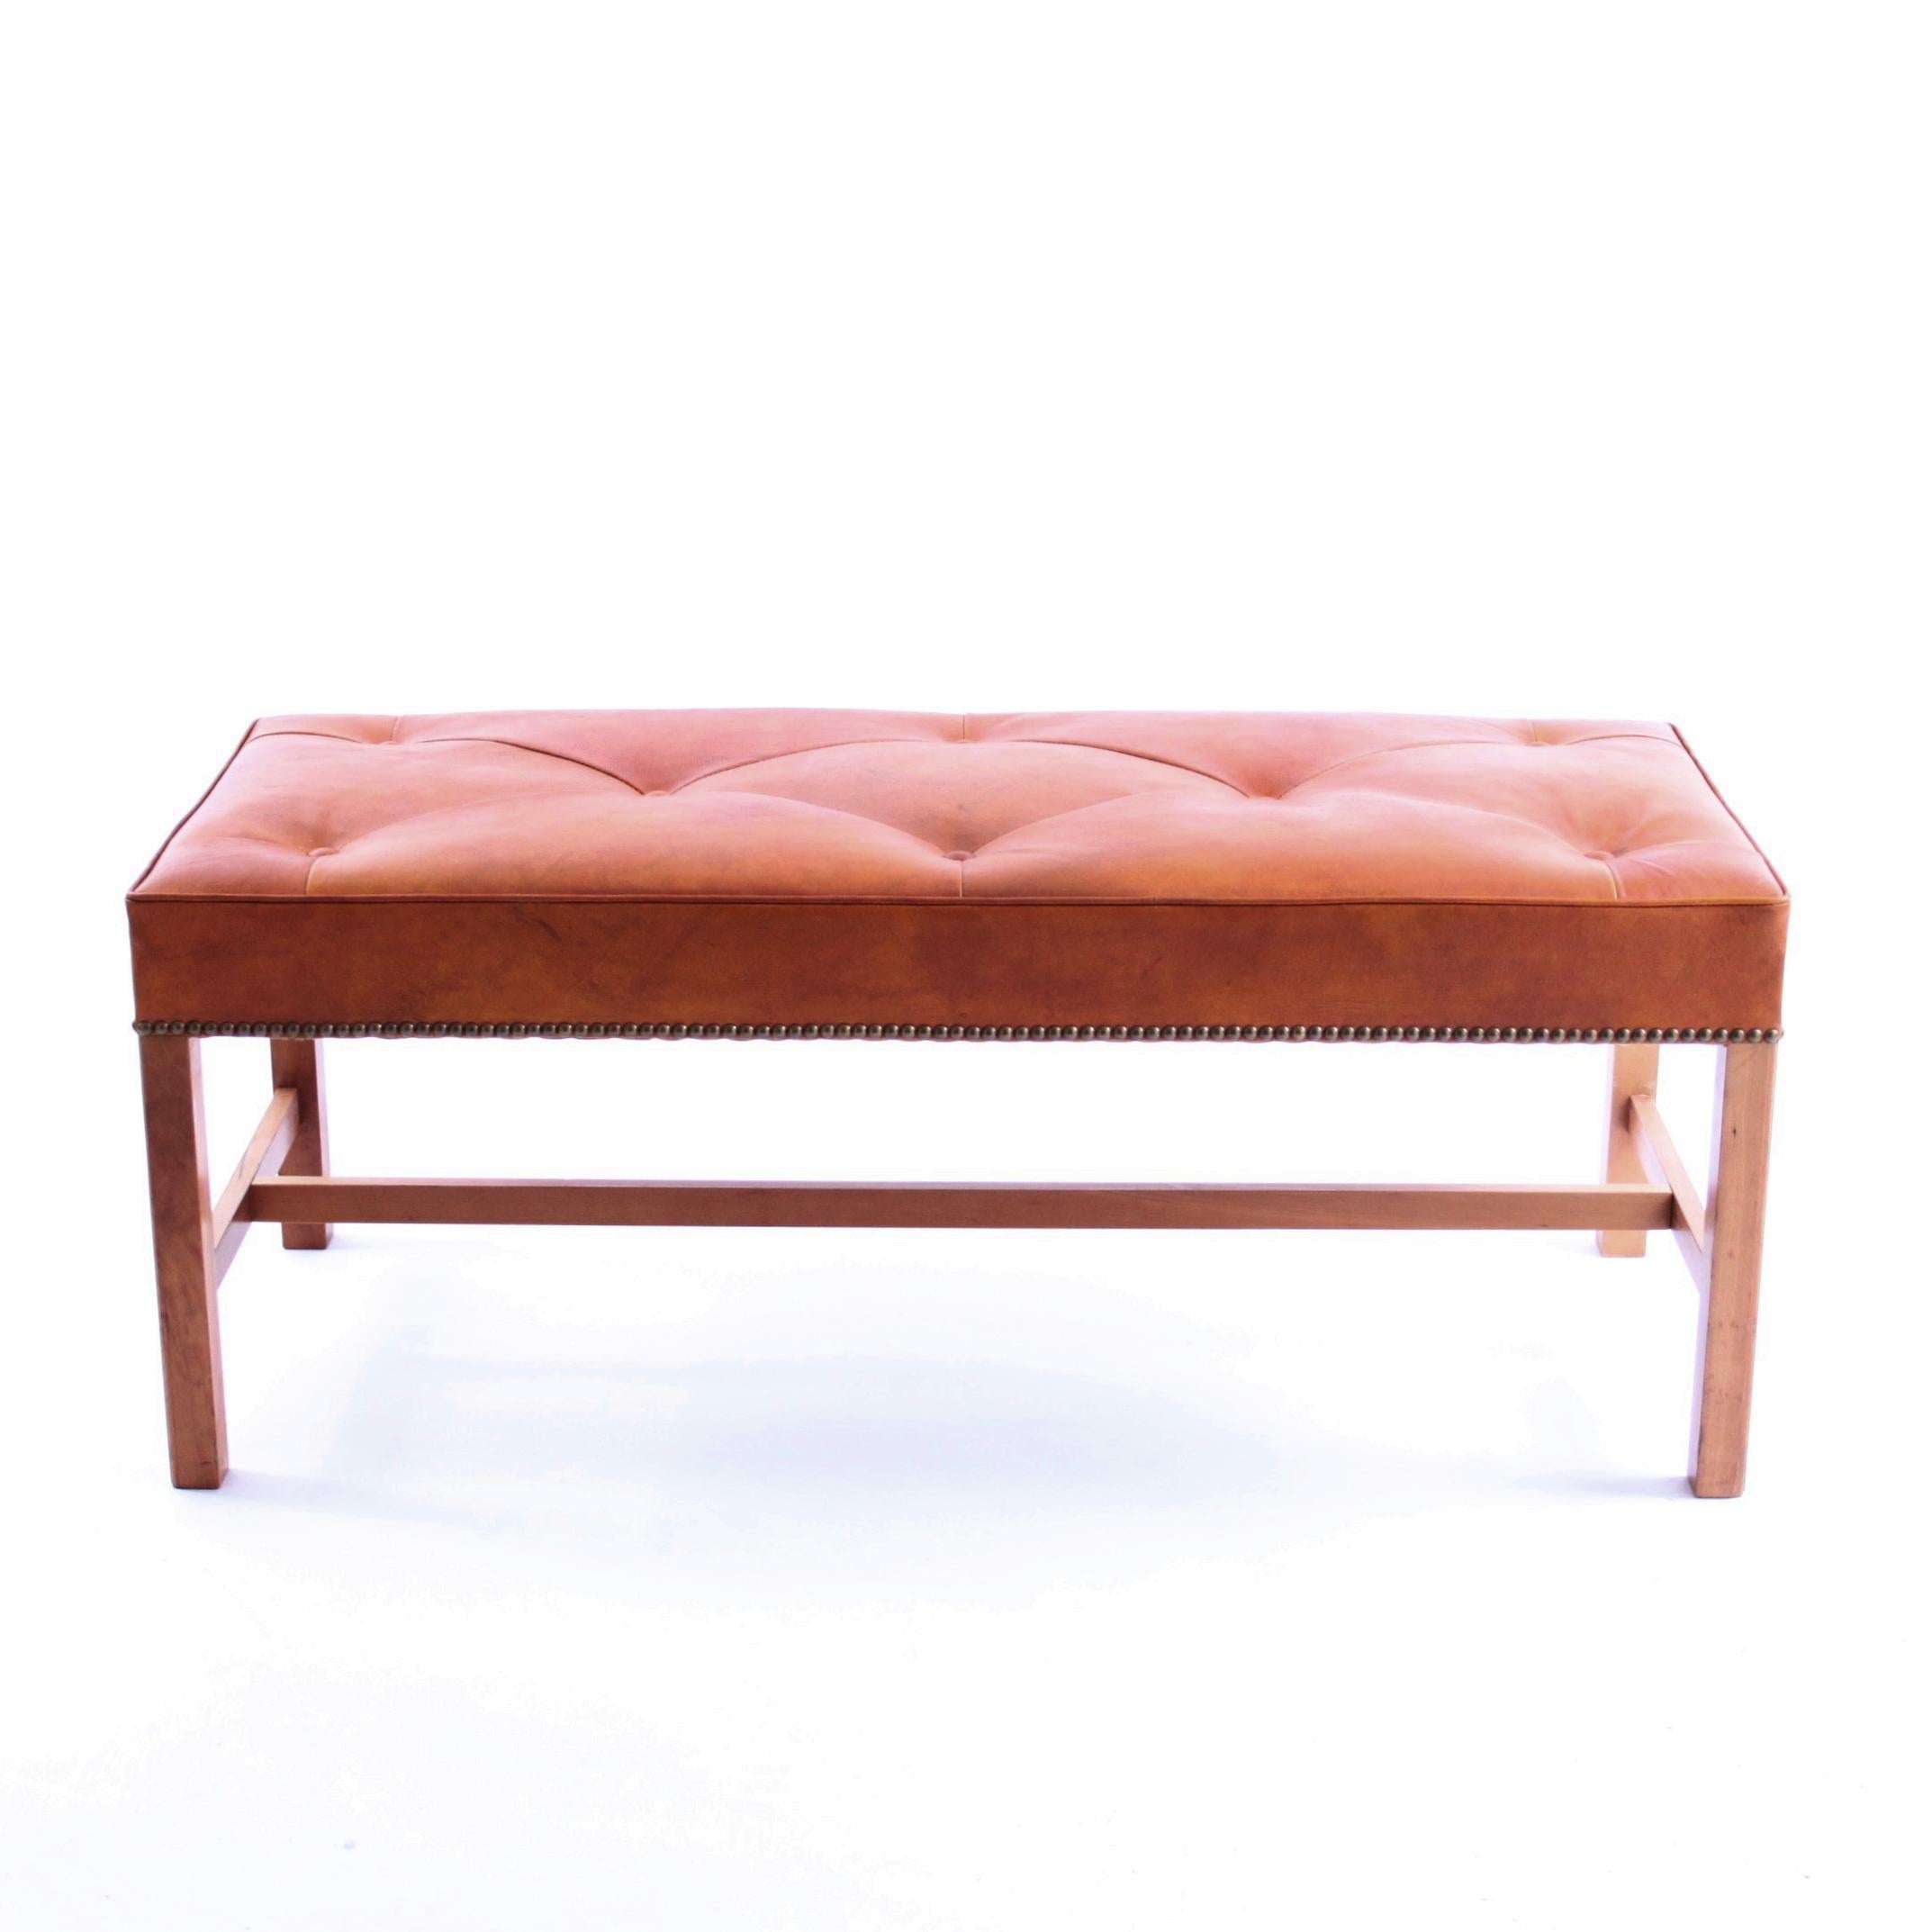 Oiled Pair of Josef Frank Benches, Mahogany and Niger leather, 1950s